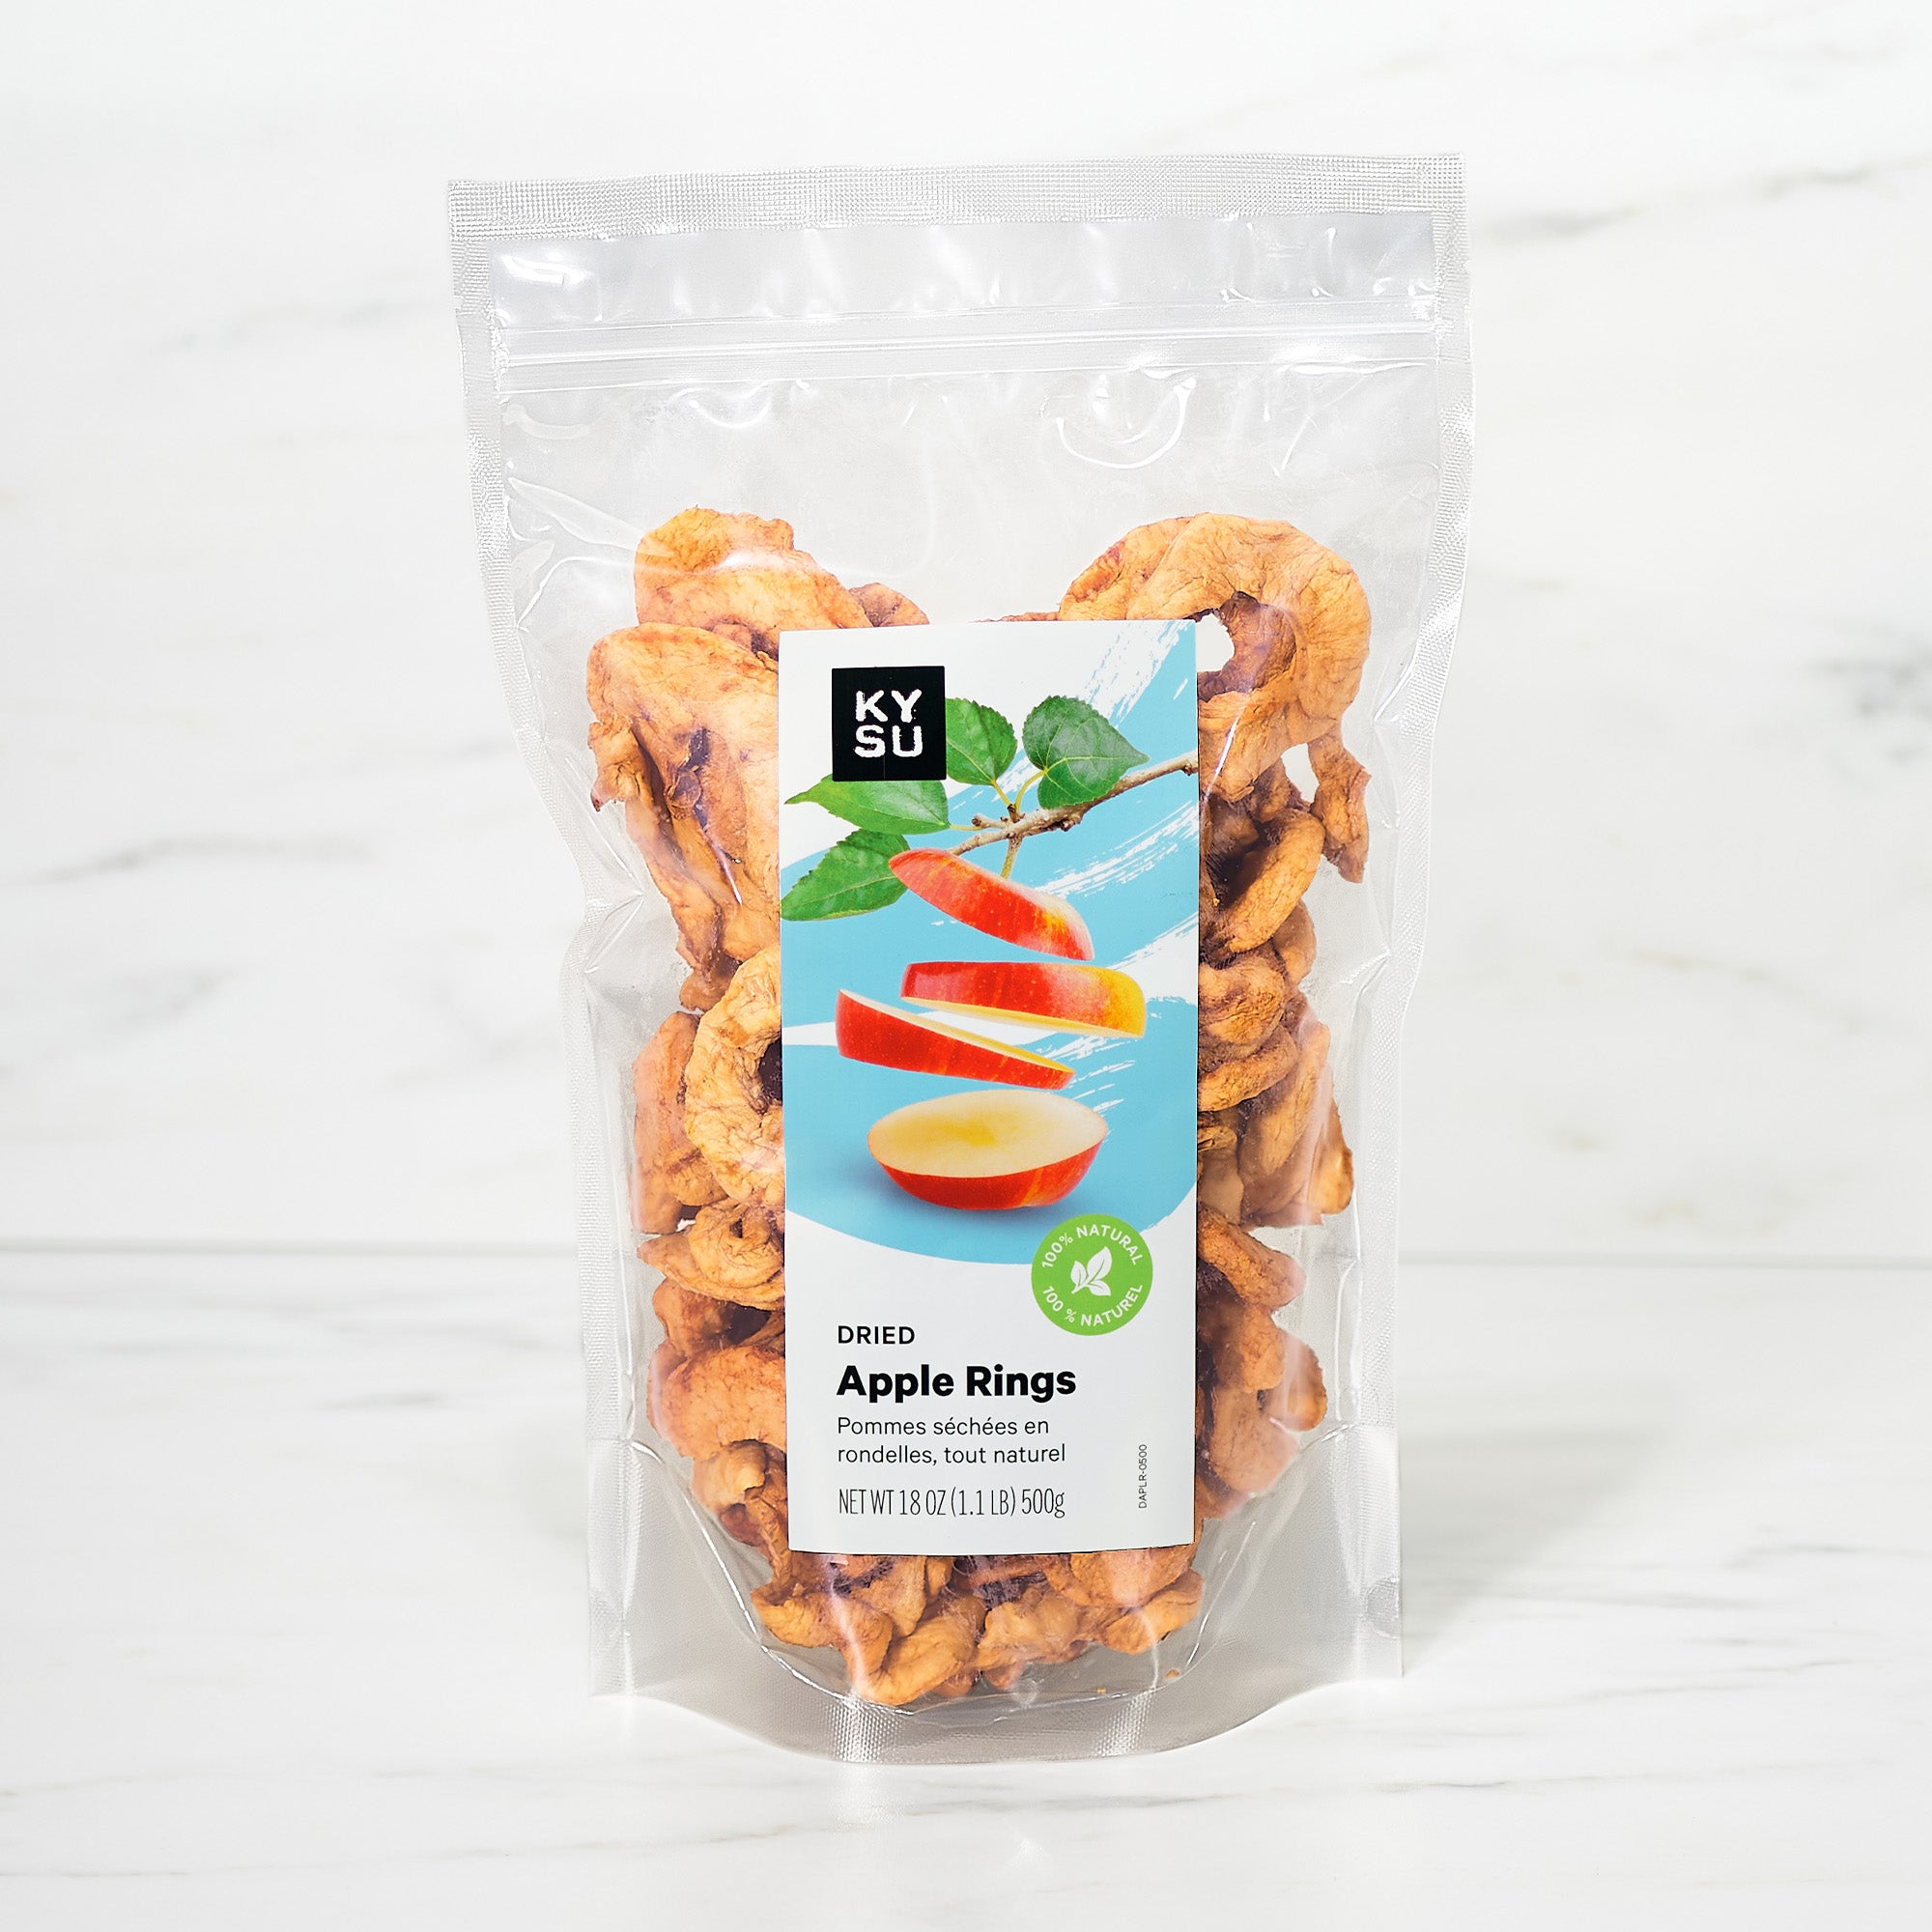 Dried Apple Rings, All Natural, 1.1 lb